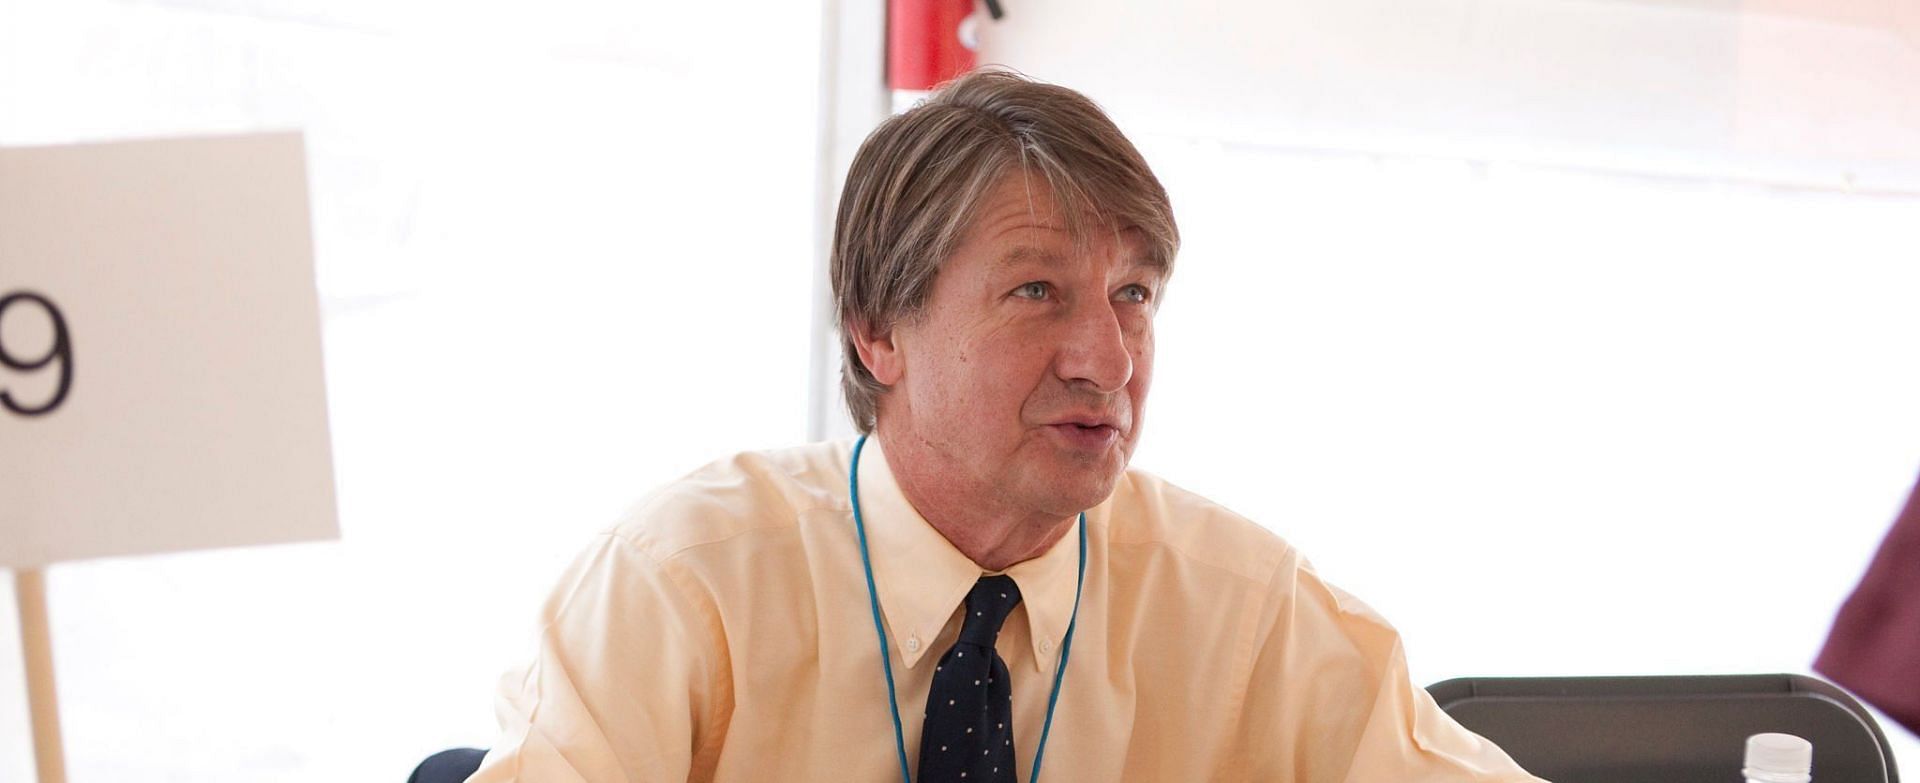 PJ O&#039;Rourke was a political satirist, journalist and author (Image via Robert Daemmrich/Getty Images)